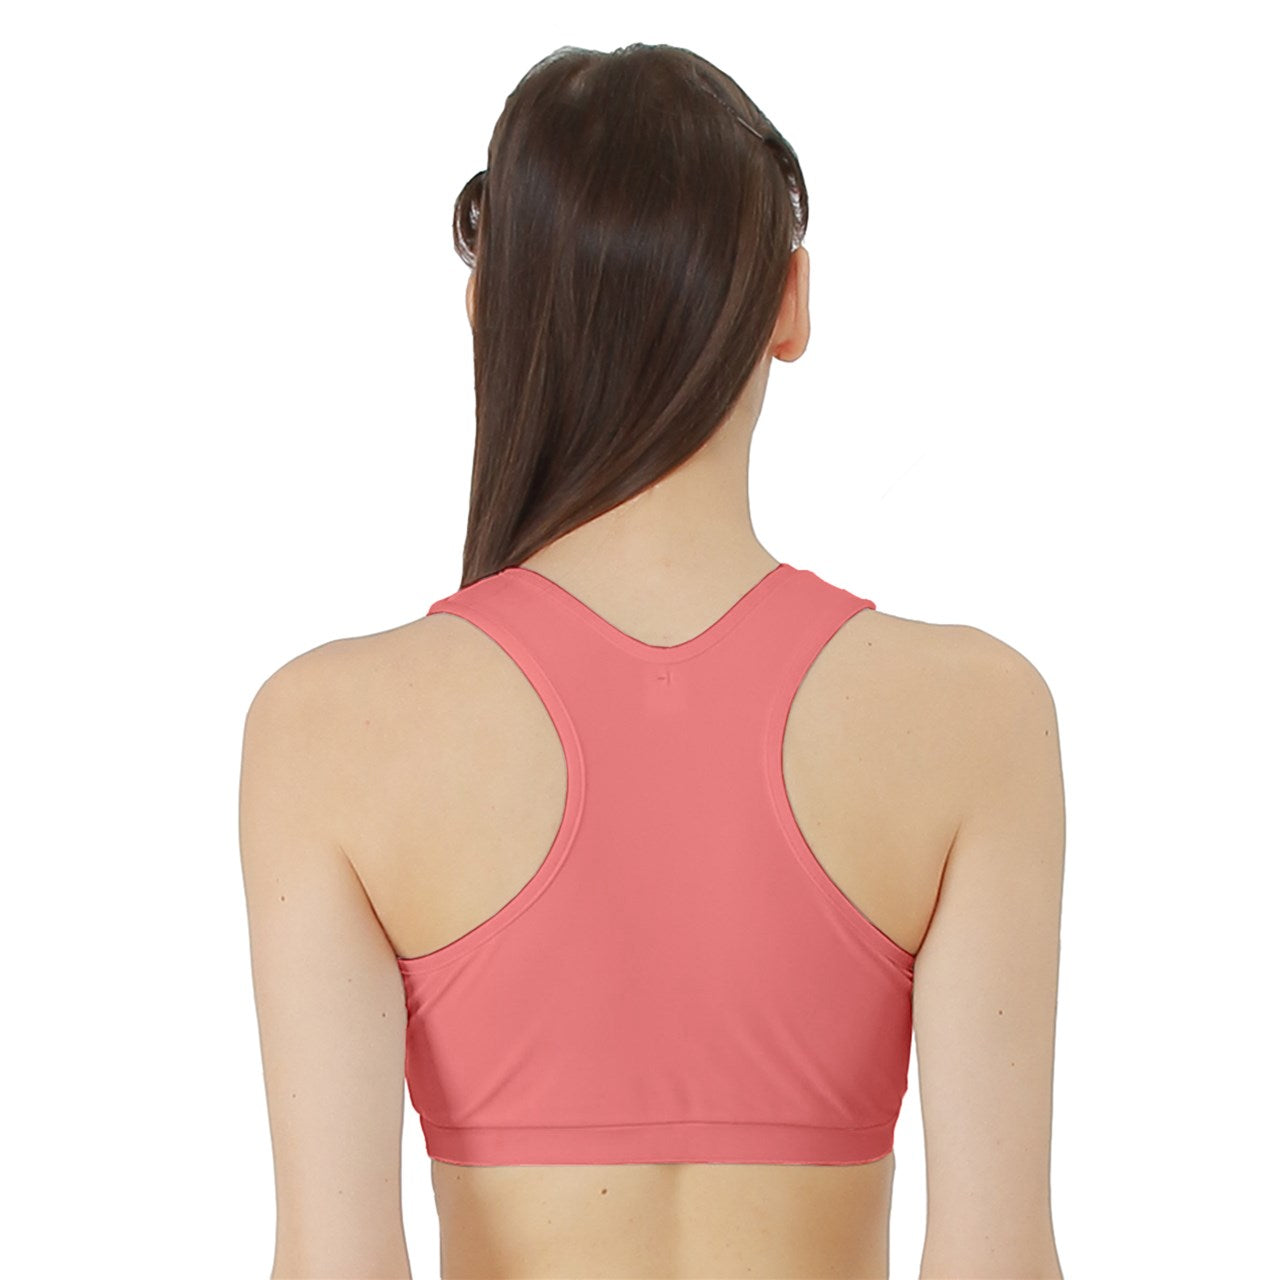 Eat Me Cookies Sports Bra with Border